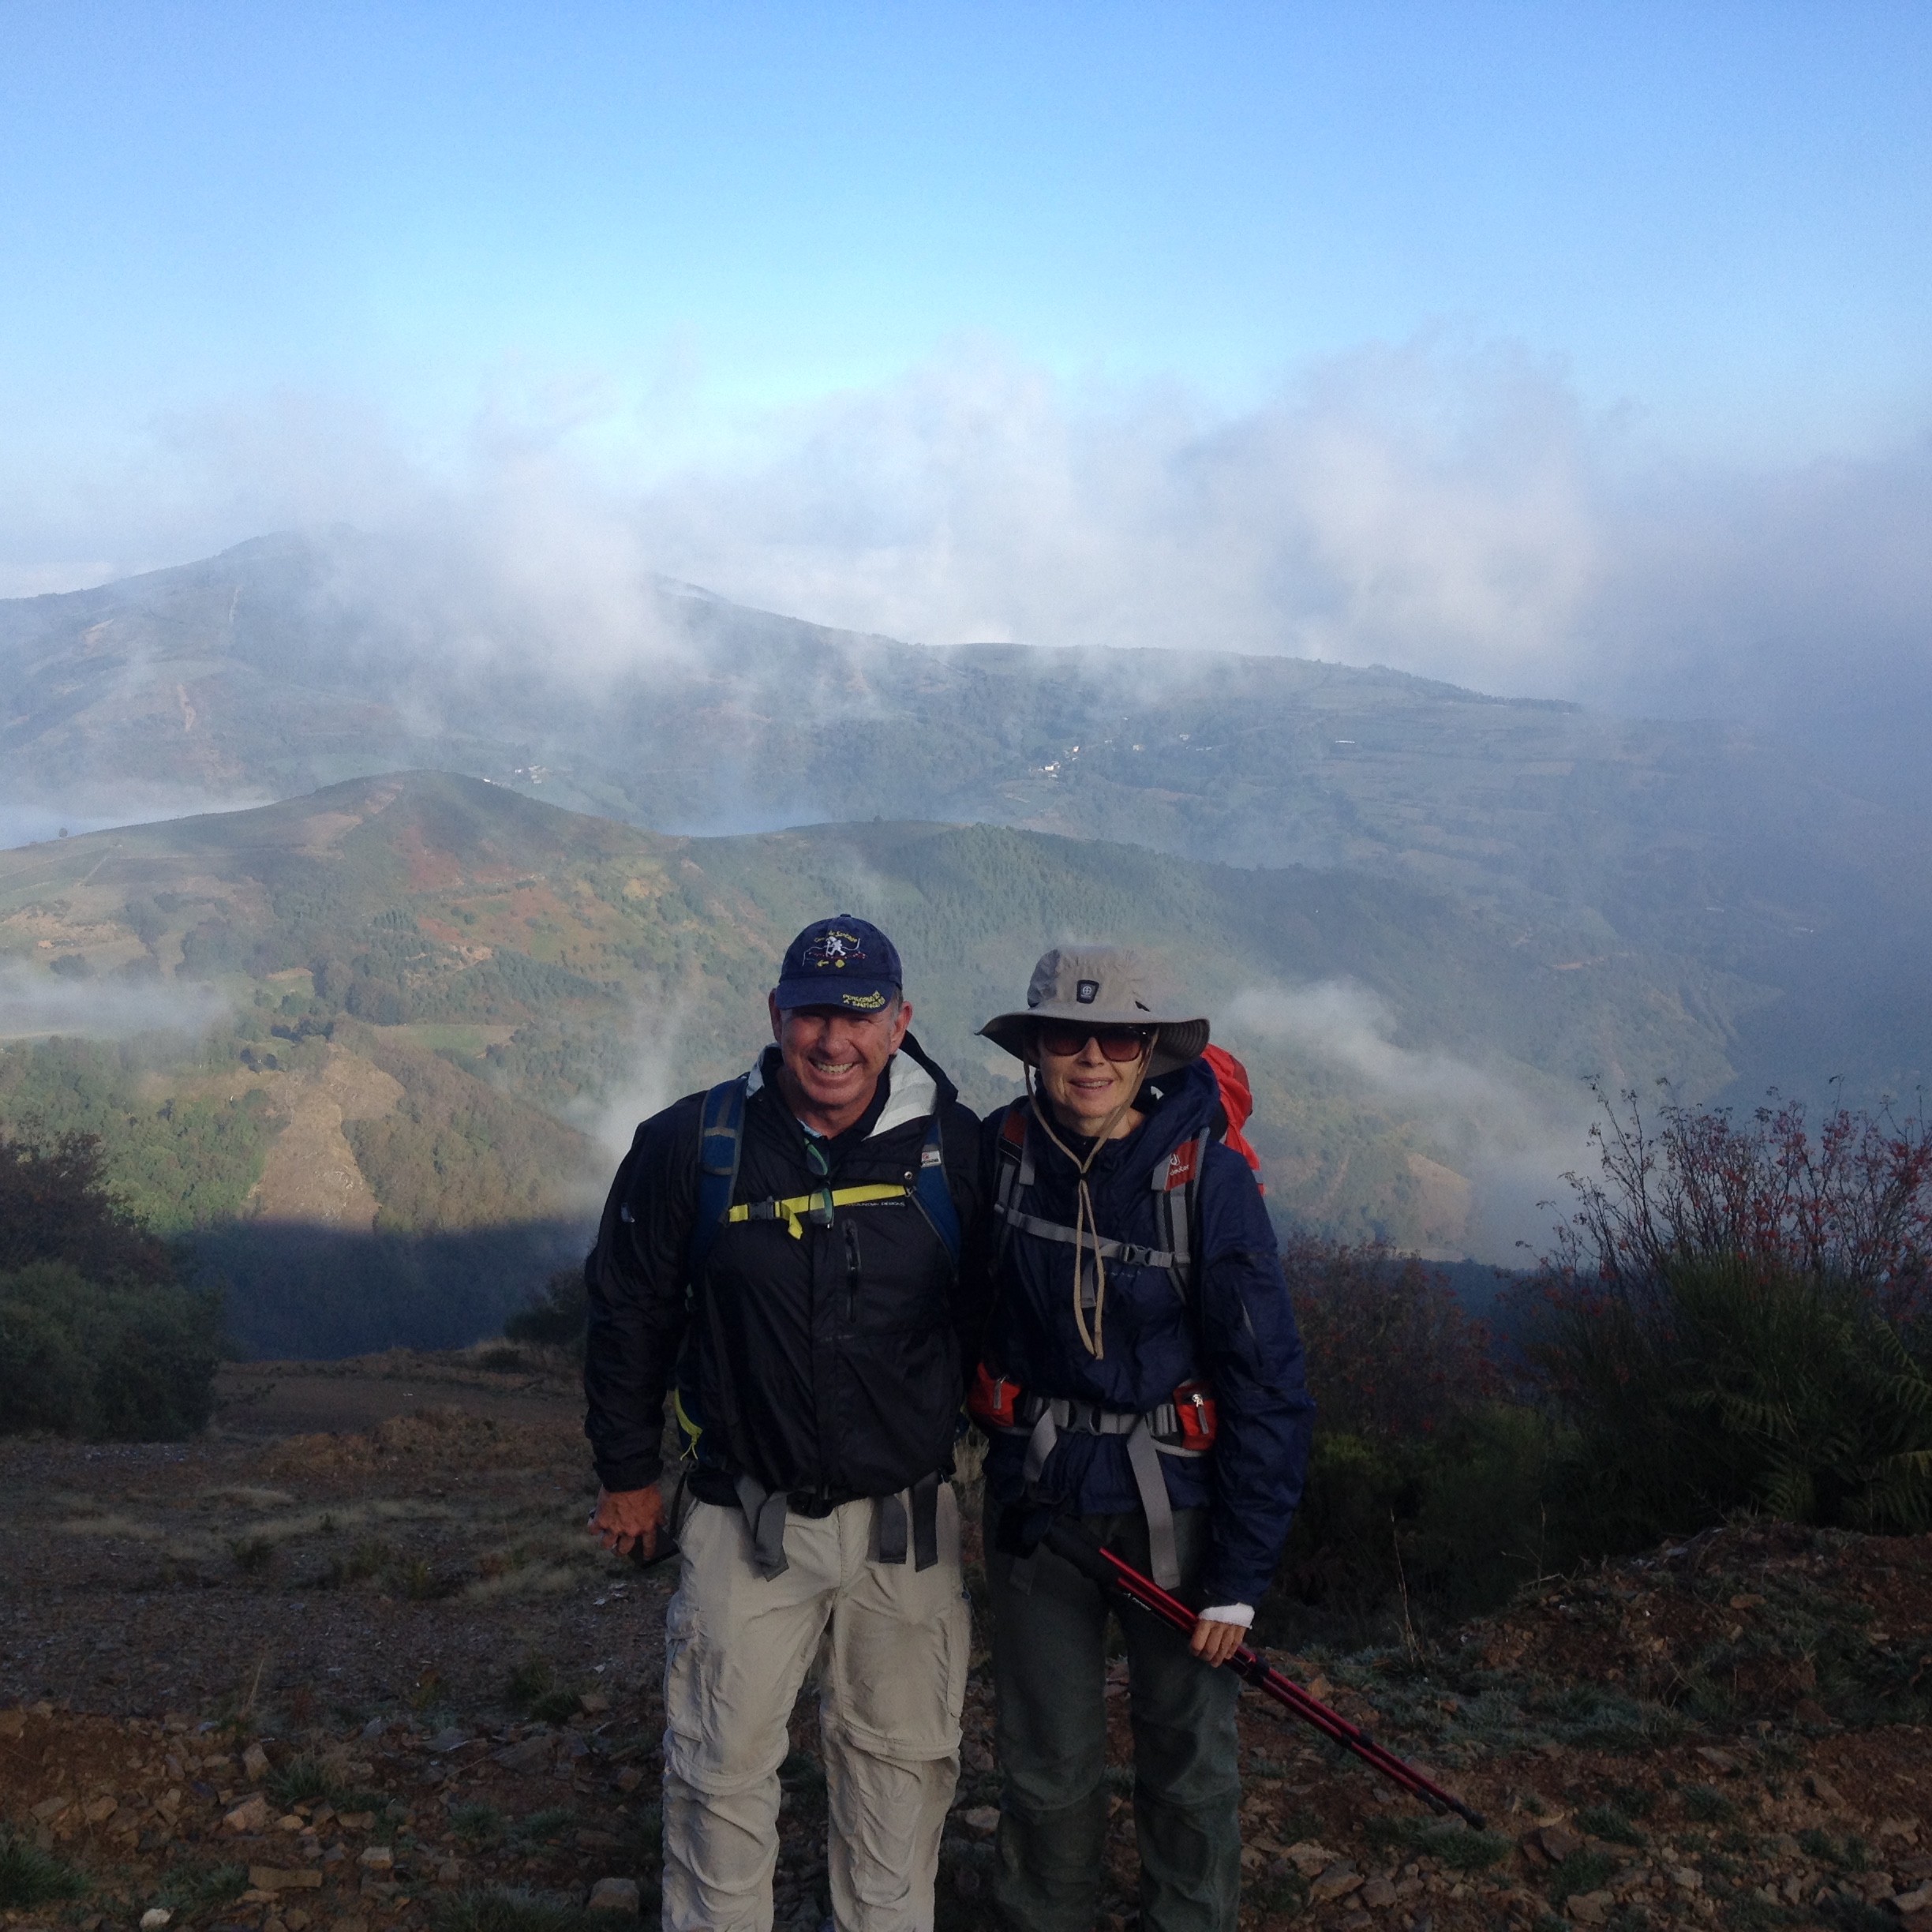 Six Life Lessons from walking the Camino de Santiago